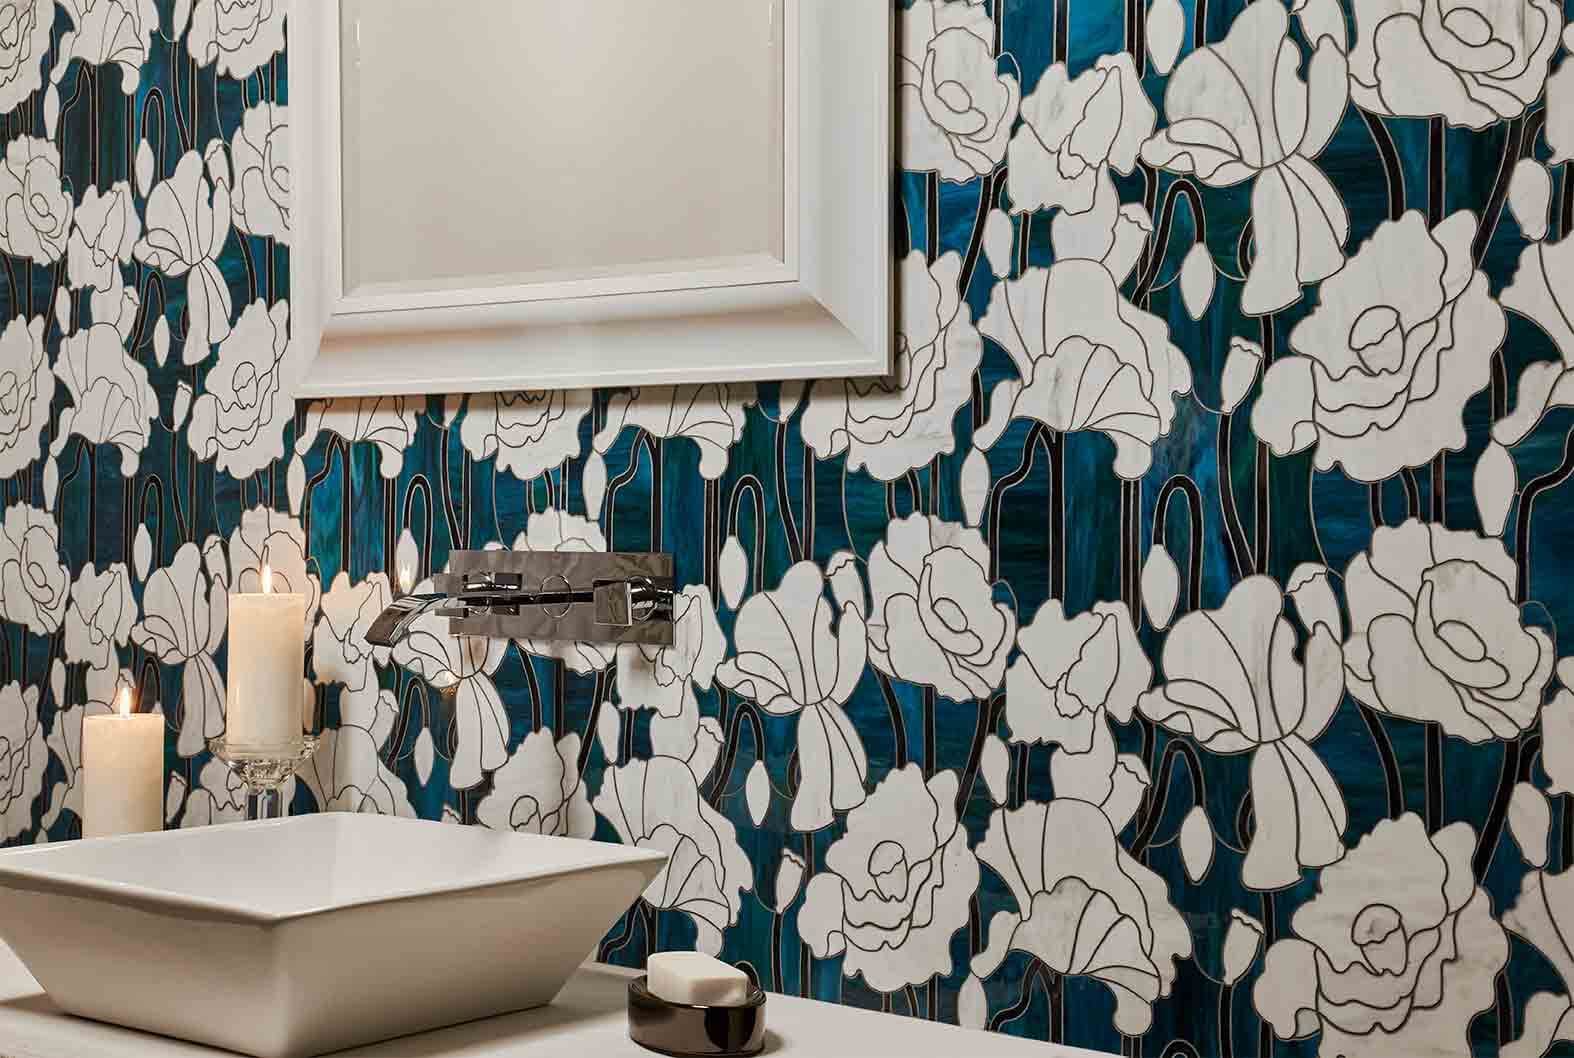 Flass and ceramic tiles can create a visually stunning wall